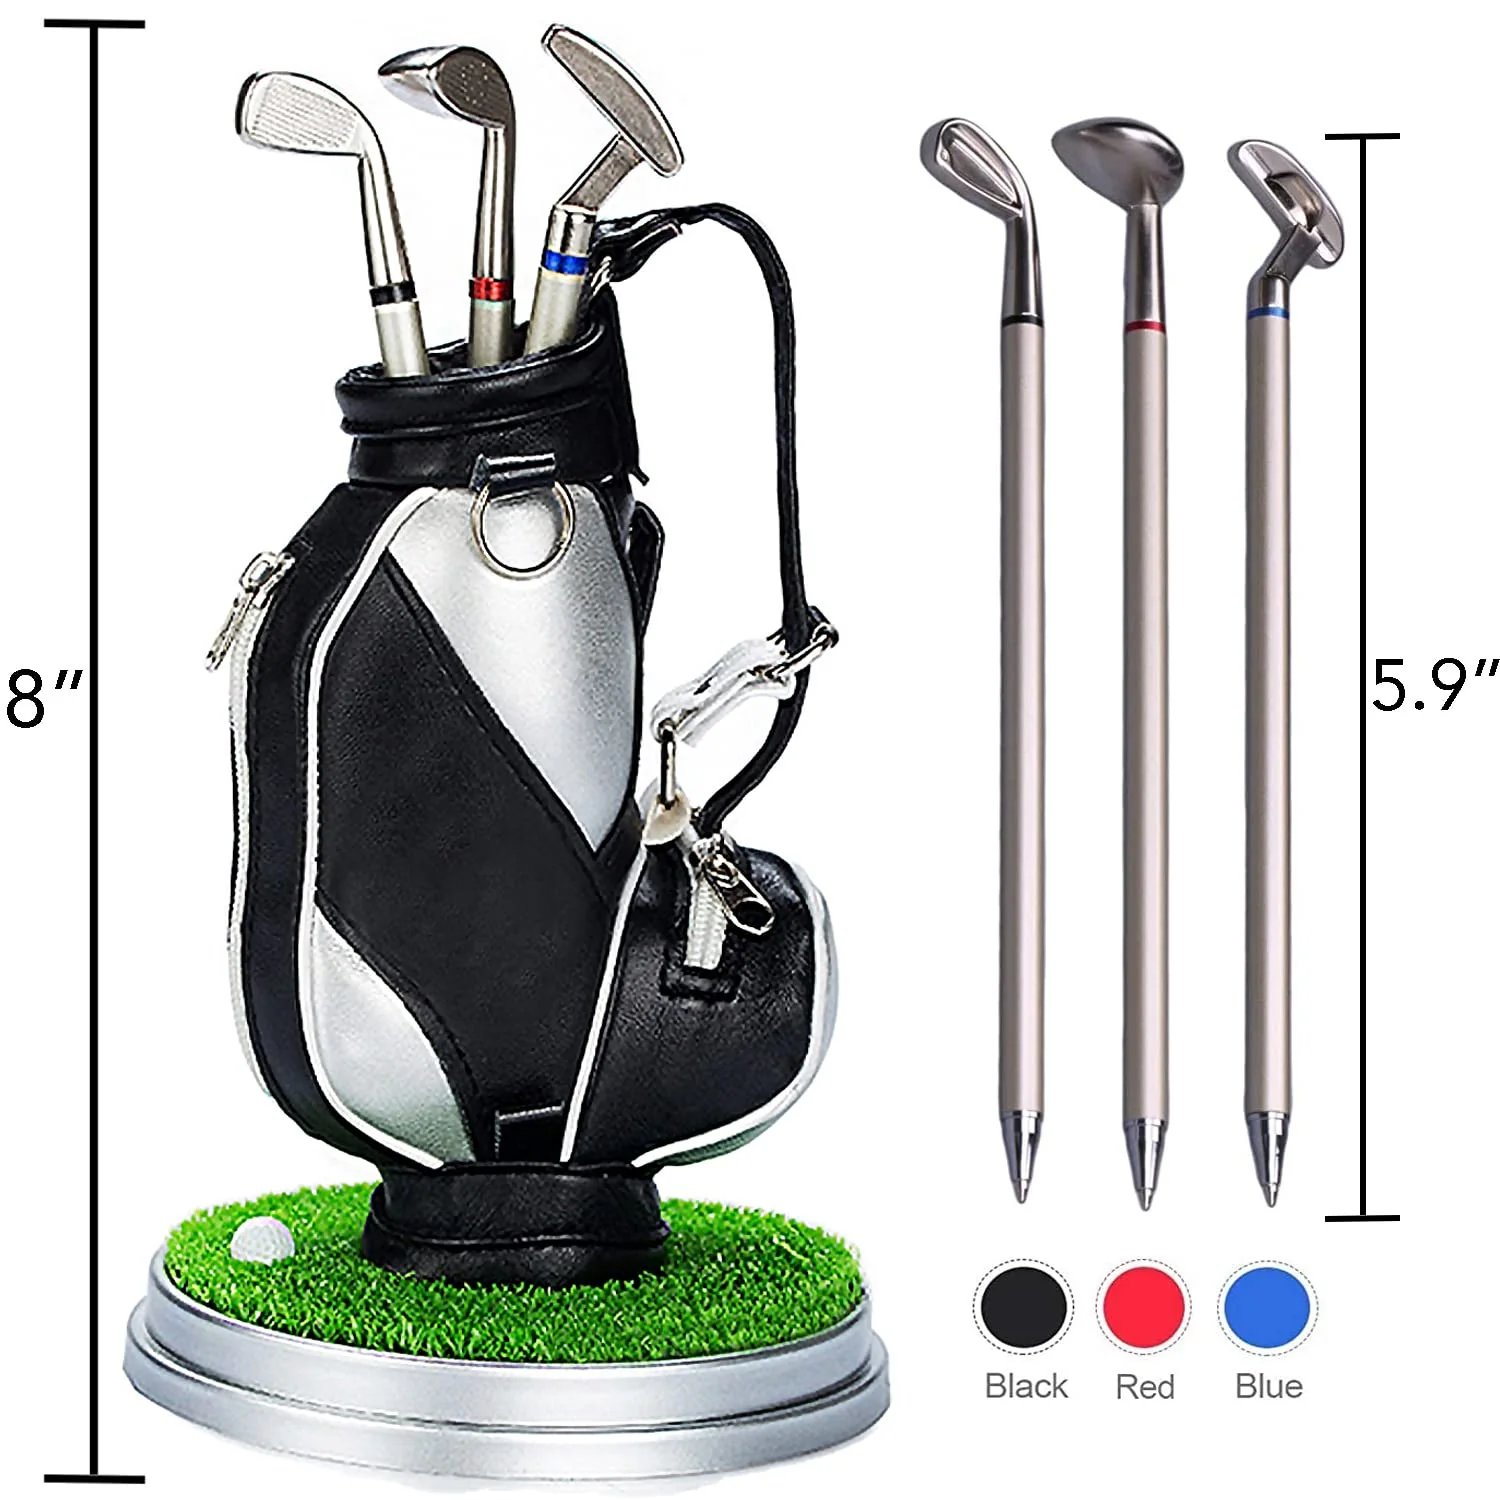 Mini Golf Pens Holder with Pen (Factory direct sales, snapped up immediately)